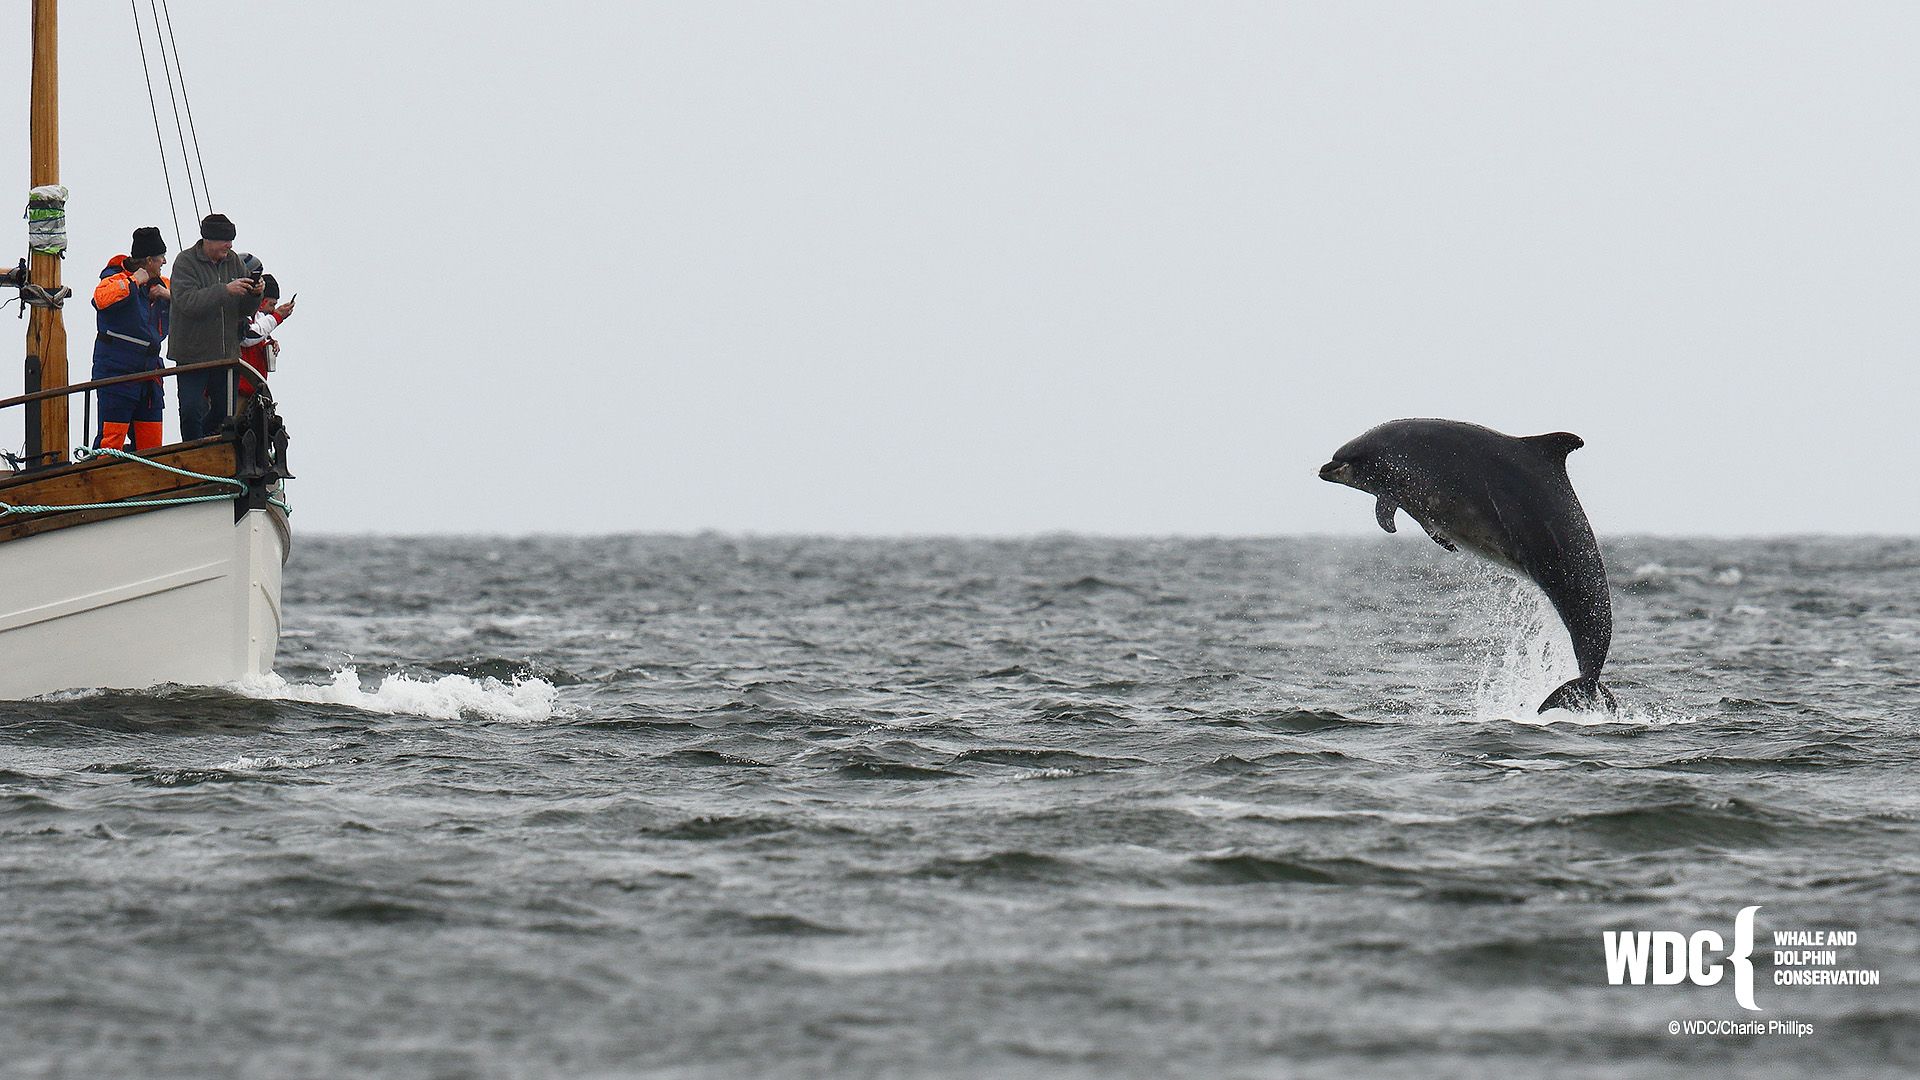 A picture showing a dolphin leaping out the water beside a boat